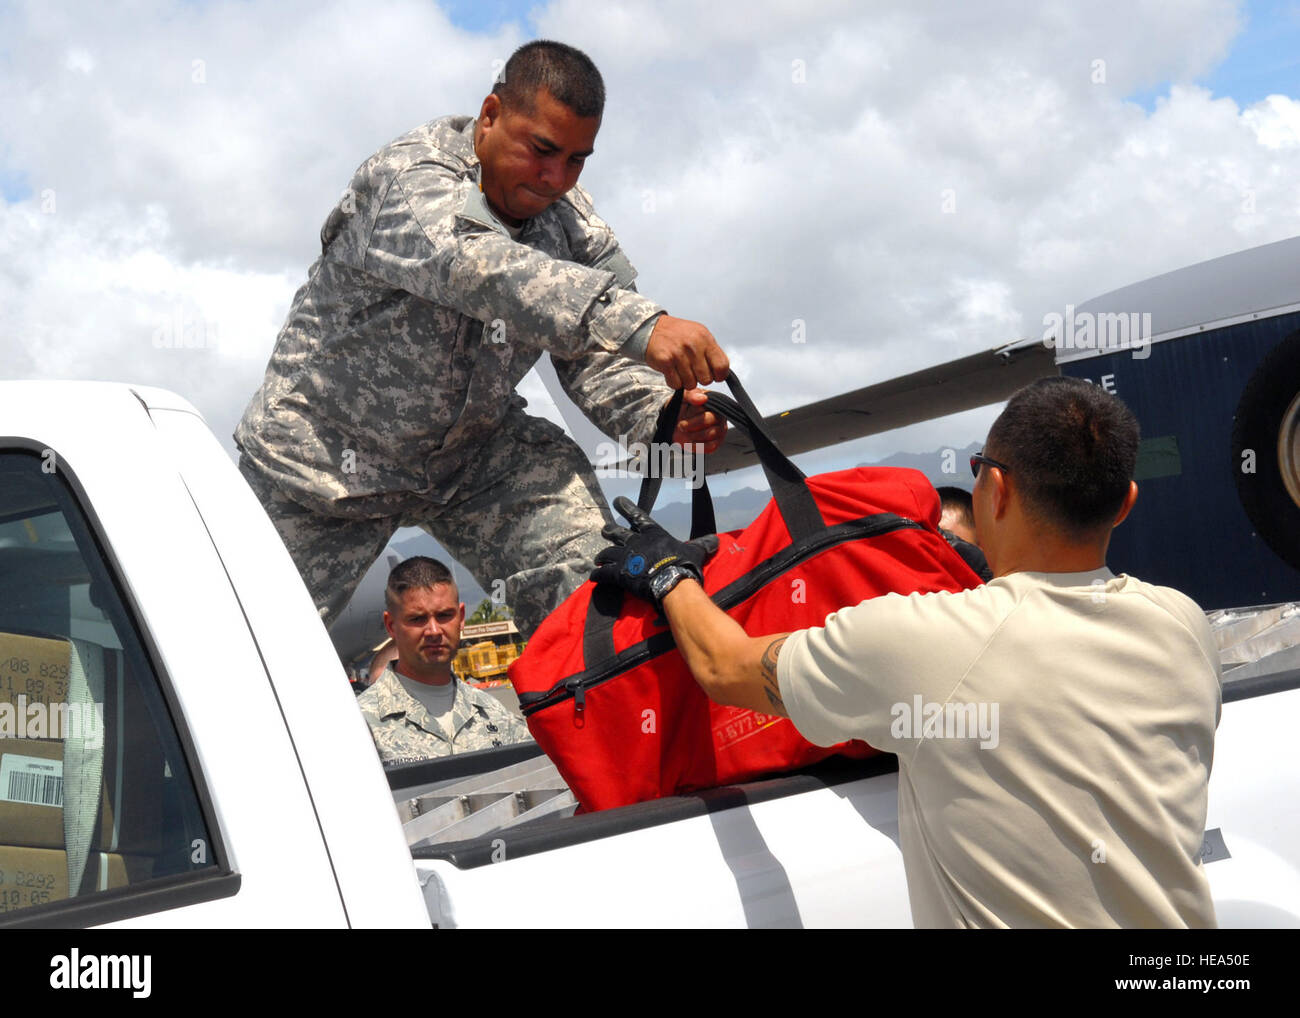 Sgt. Richard Tabula from the Hawaii National Guard's Chemical Biological Radiological Nuclear, or high-yield explosive Enhanced Response Force Package and Staff Sgt. Nathan Angel from the 15th Logistics Readiness Squadron , unloading a pickup truck, in support of humanitarian effort to American Samoa, on 30 September 2009, at Hickam Air Force Base, Hawaii.  The humanitarian support provided aid for the island nation, which was struck by an earthquake and tsunami Sept. 29. Stock Photo